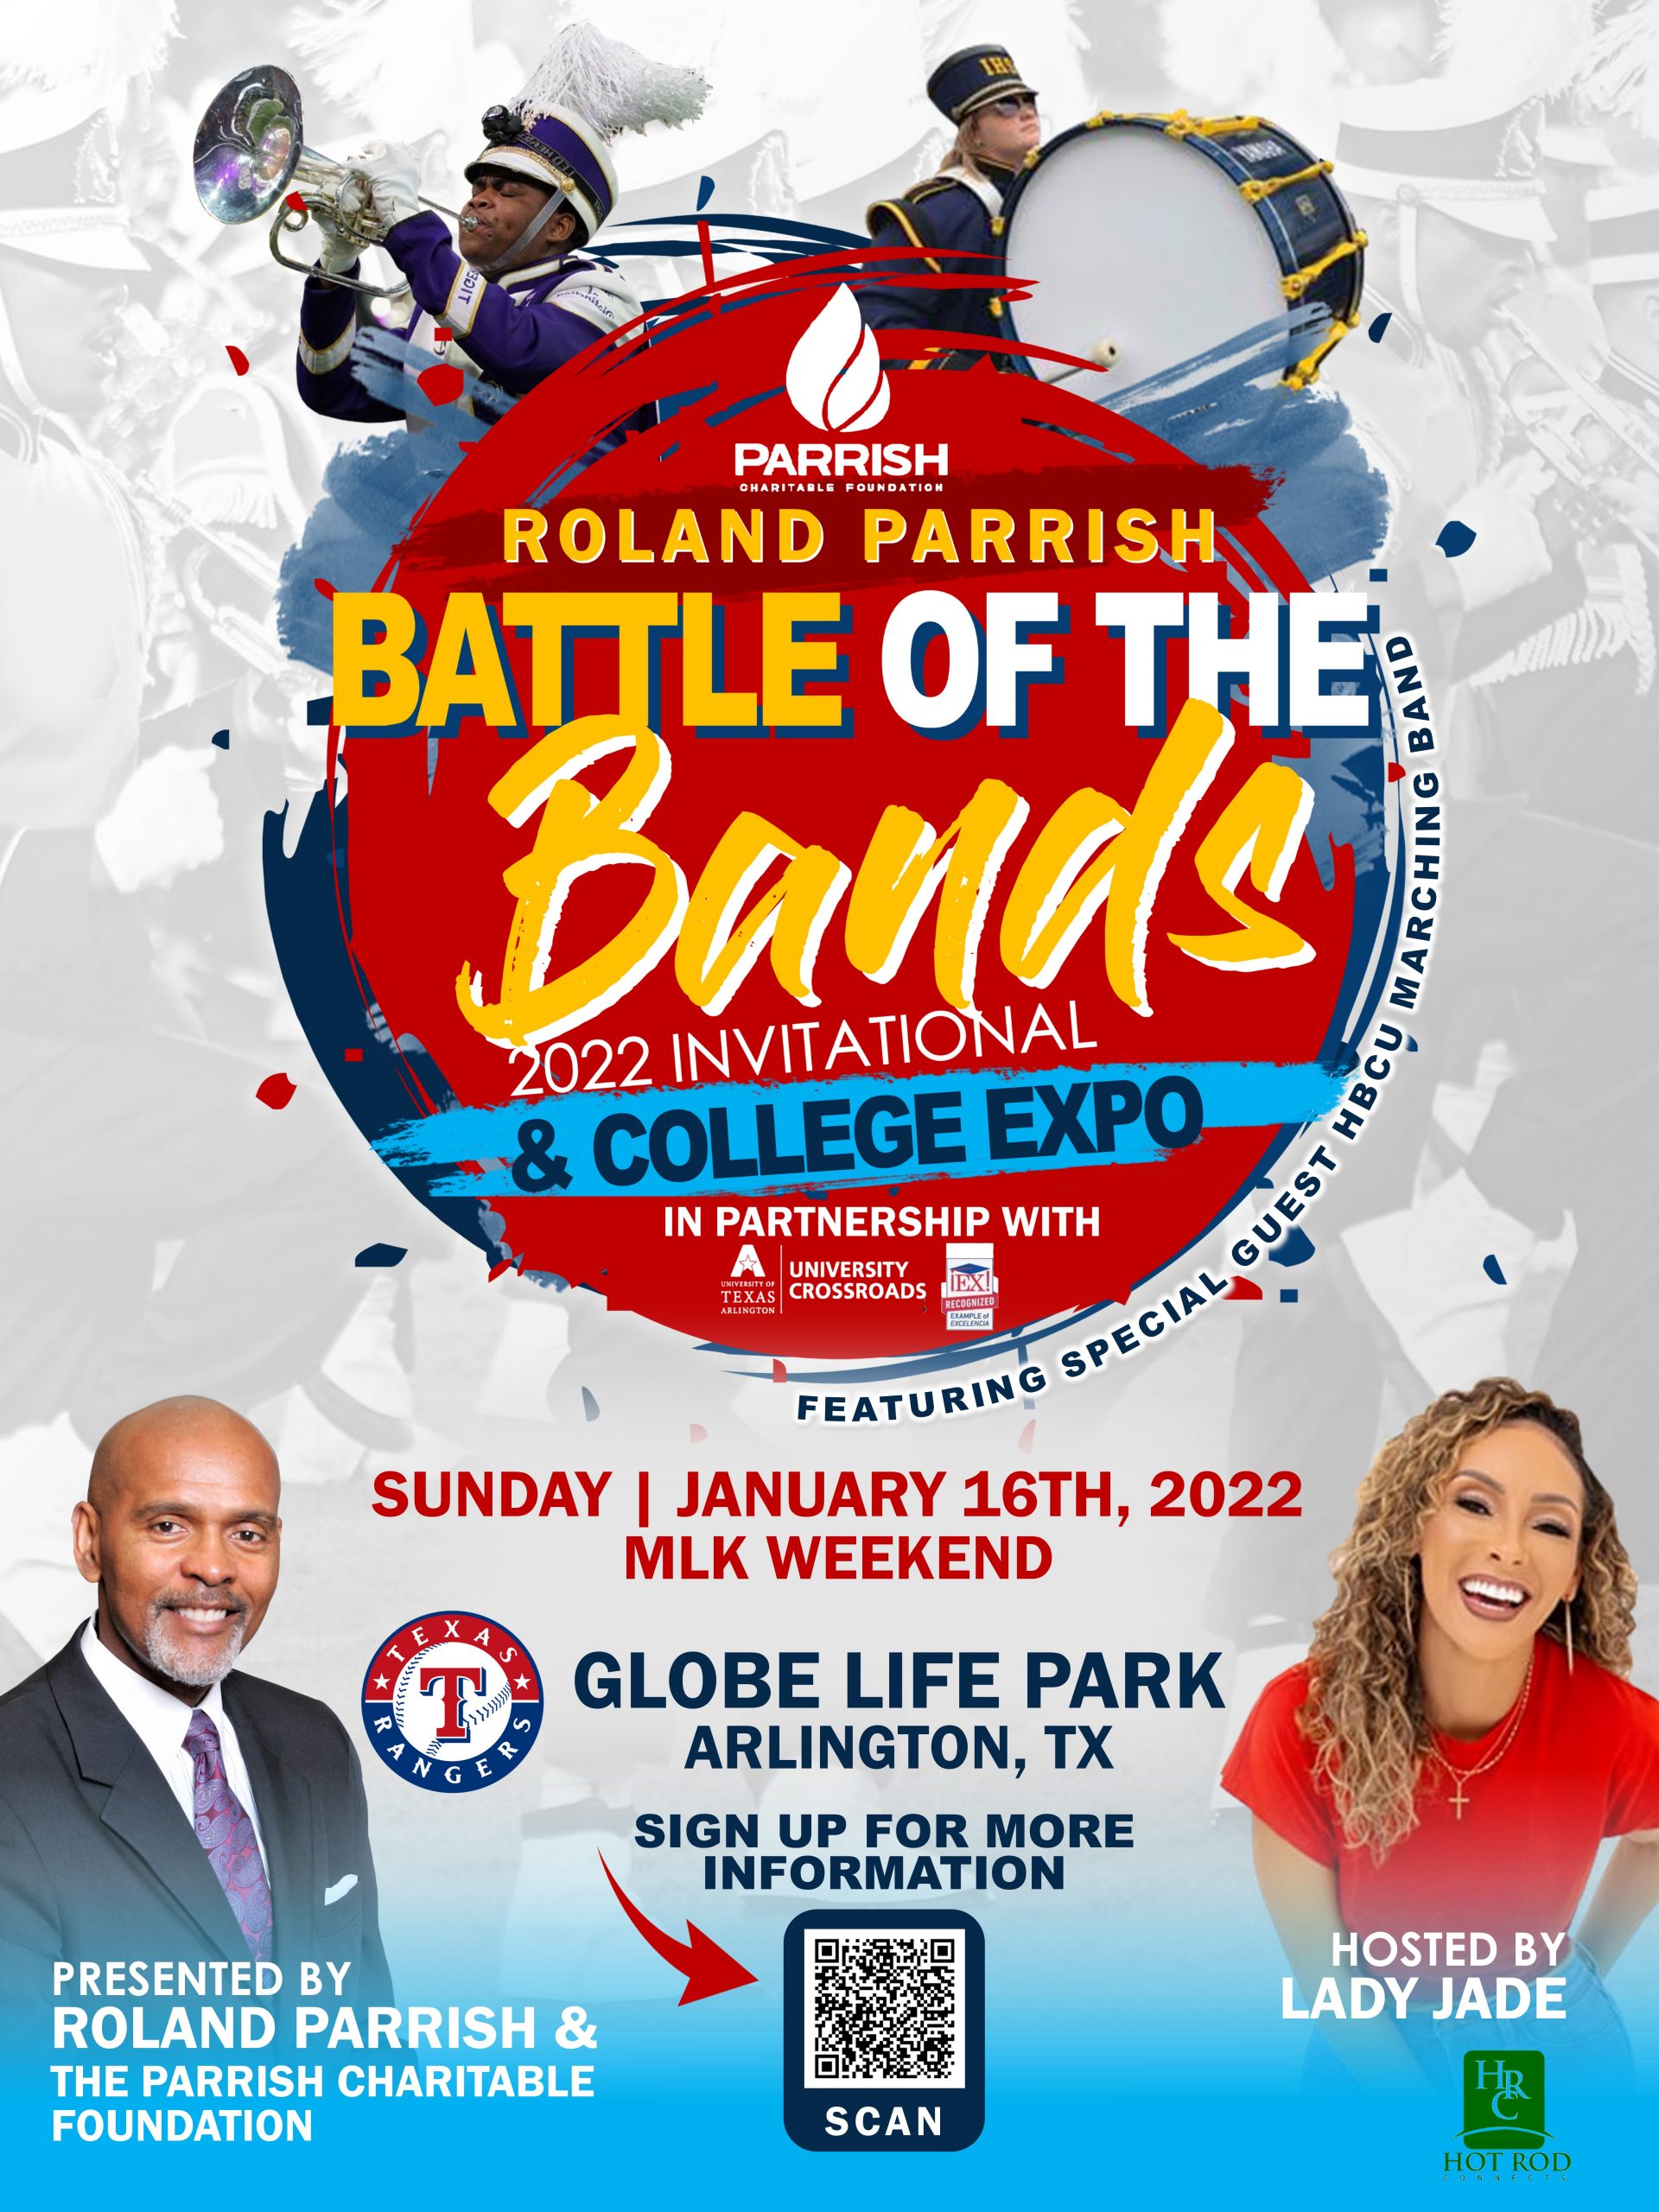 Roland Parrish Battle of the Bands 2022 Invitational & College Expo